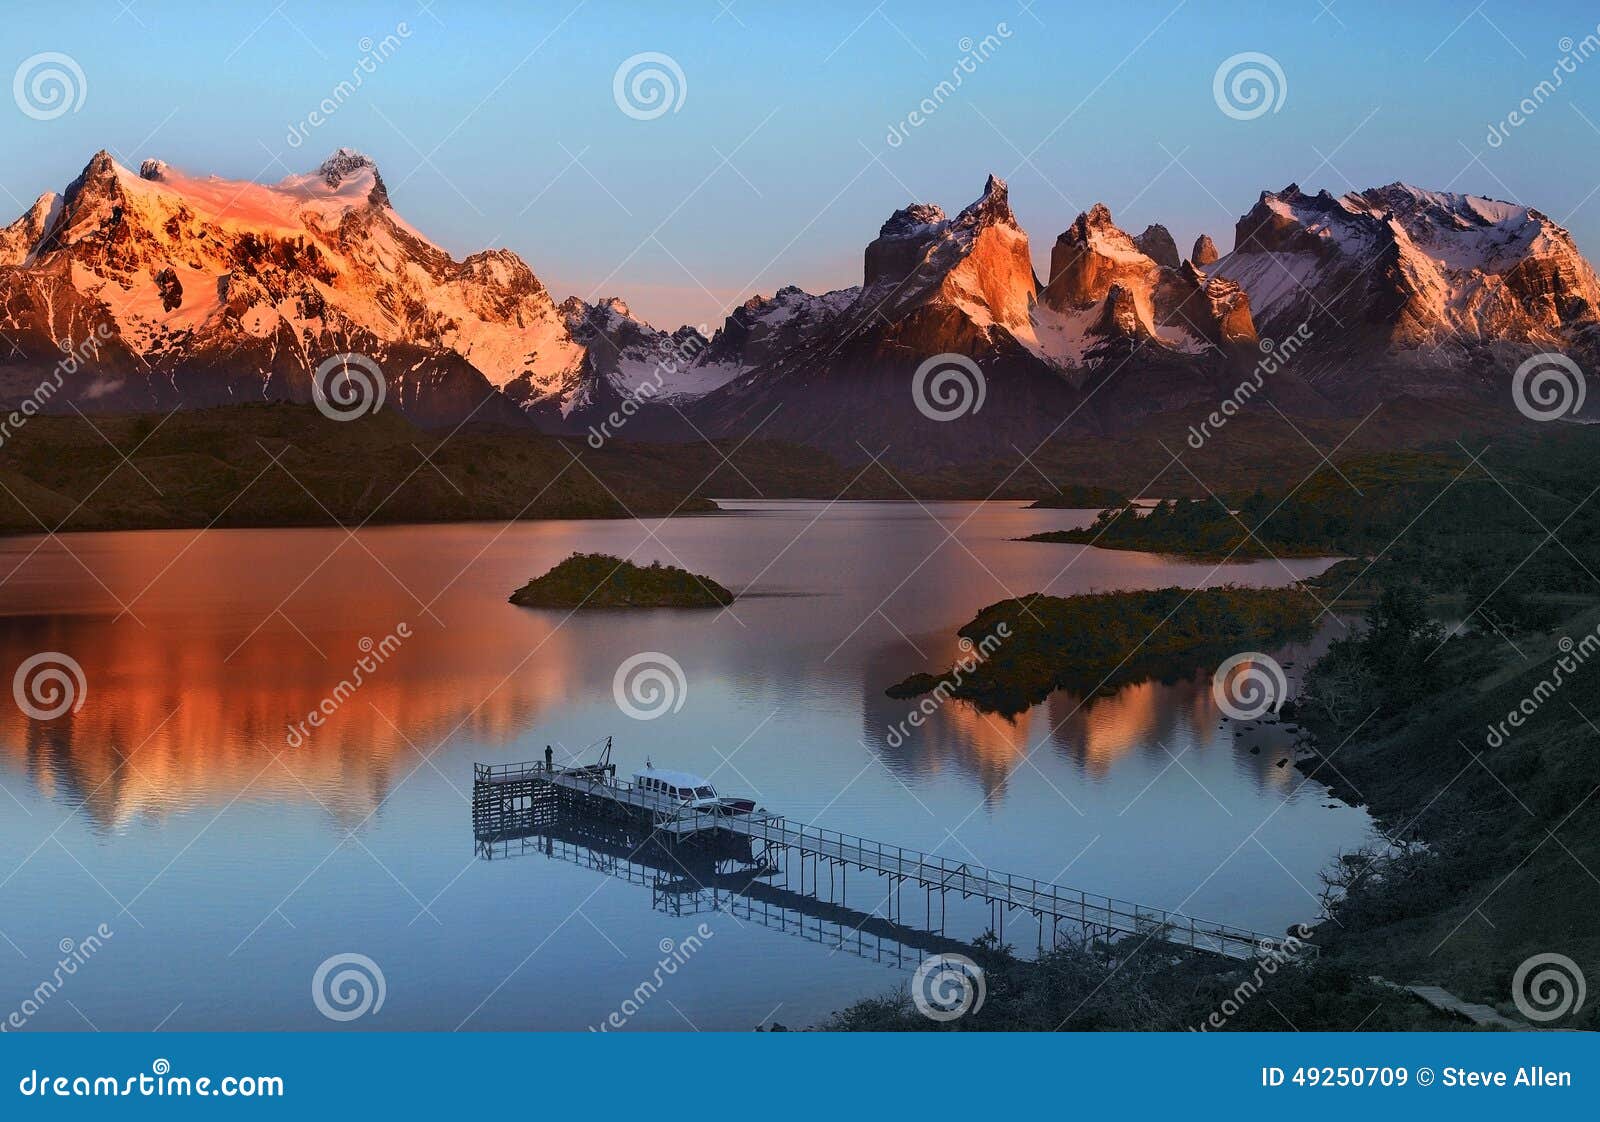 torres del paine national park in patagonia in southern chile